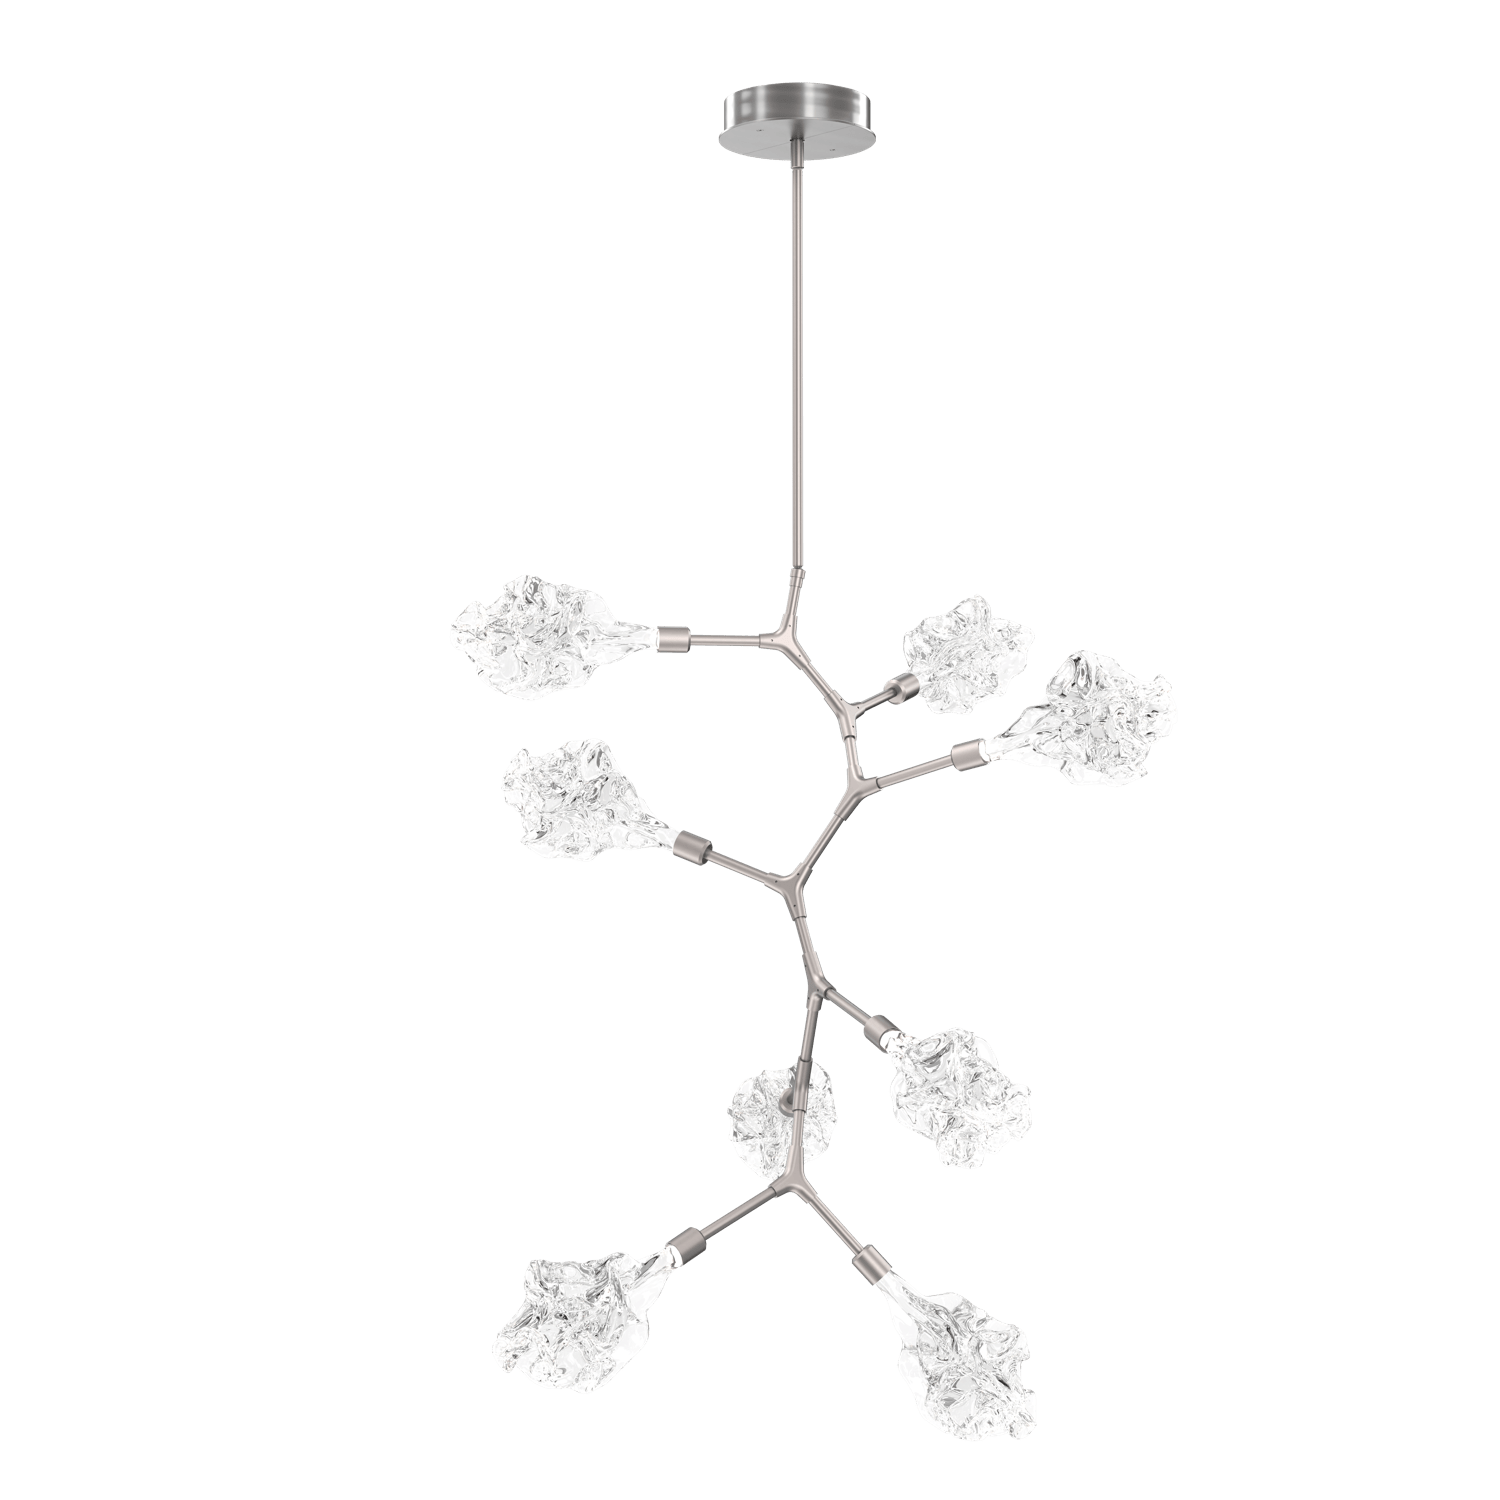 CHB0059-VB-SN-Hammerton-Studio-Blossom-8-light-organic-vine-chandelier-with-satin-nickel-finish-and-clear-handblown-crystal-glass-shades-and-LED-lamping